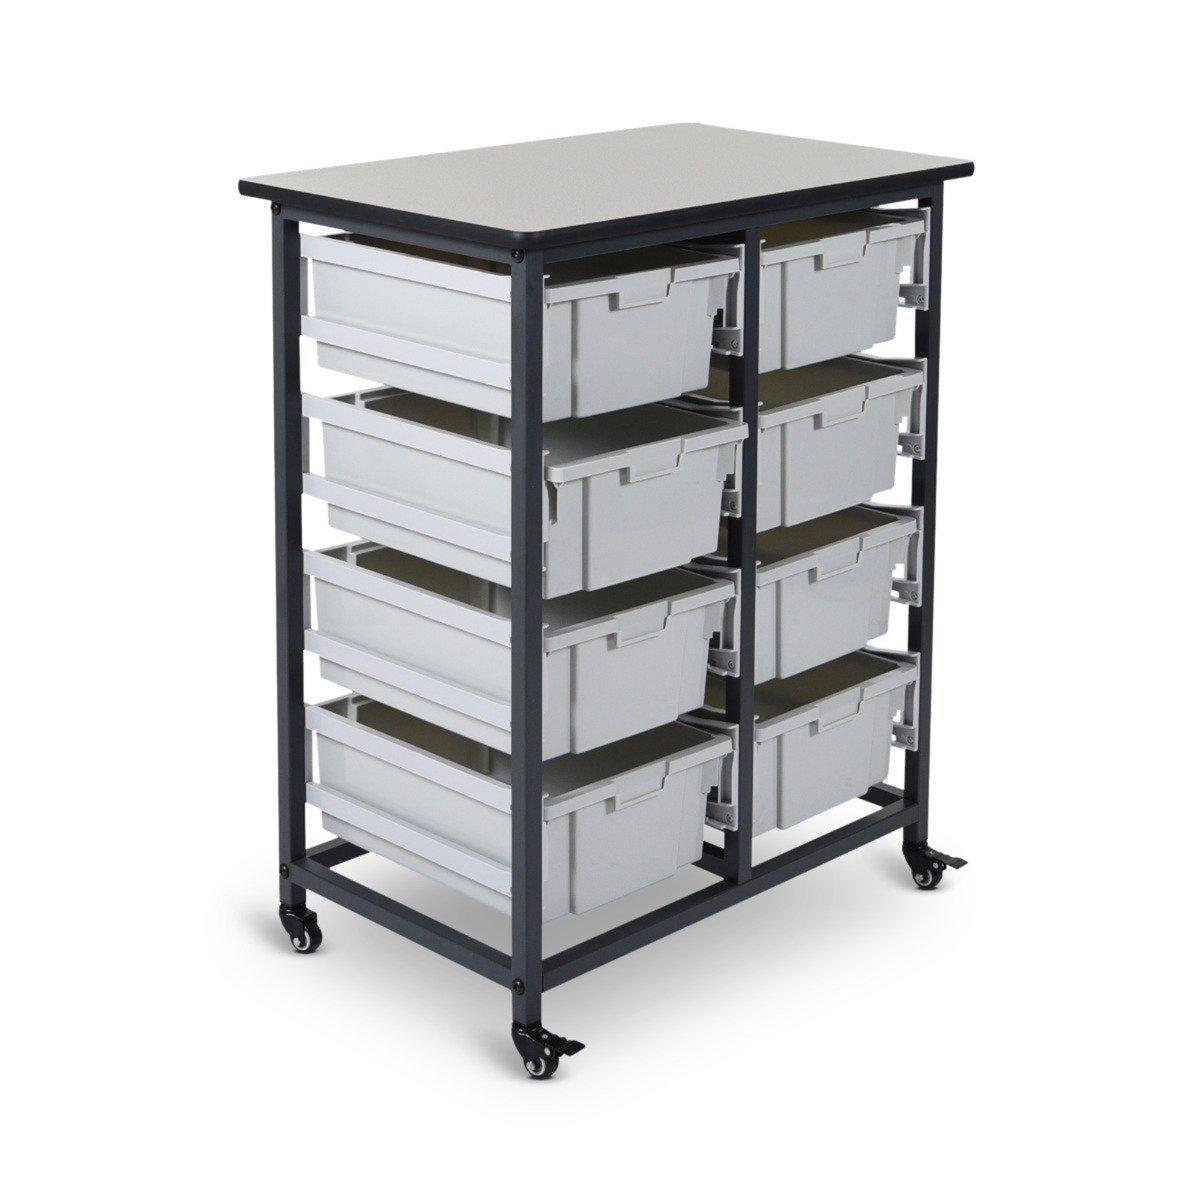 Mobile Bin Double Row Storage Unit with 8 Large Light Gray Bins